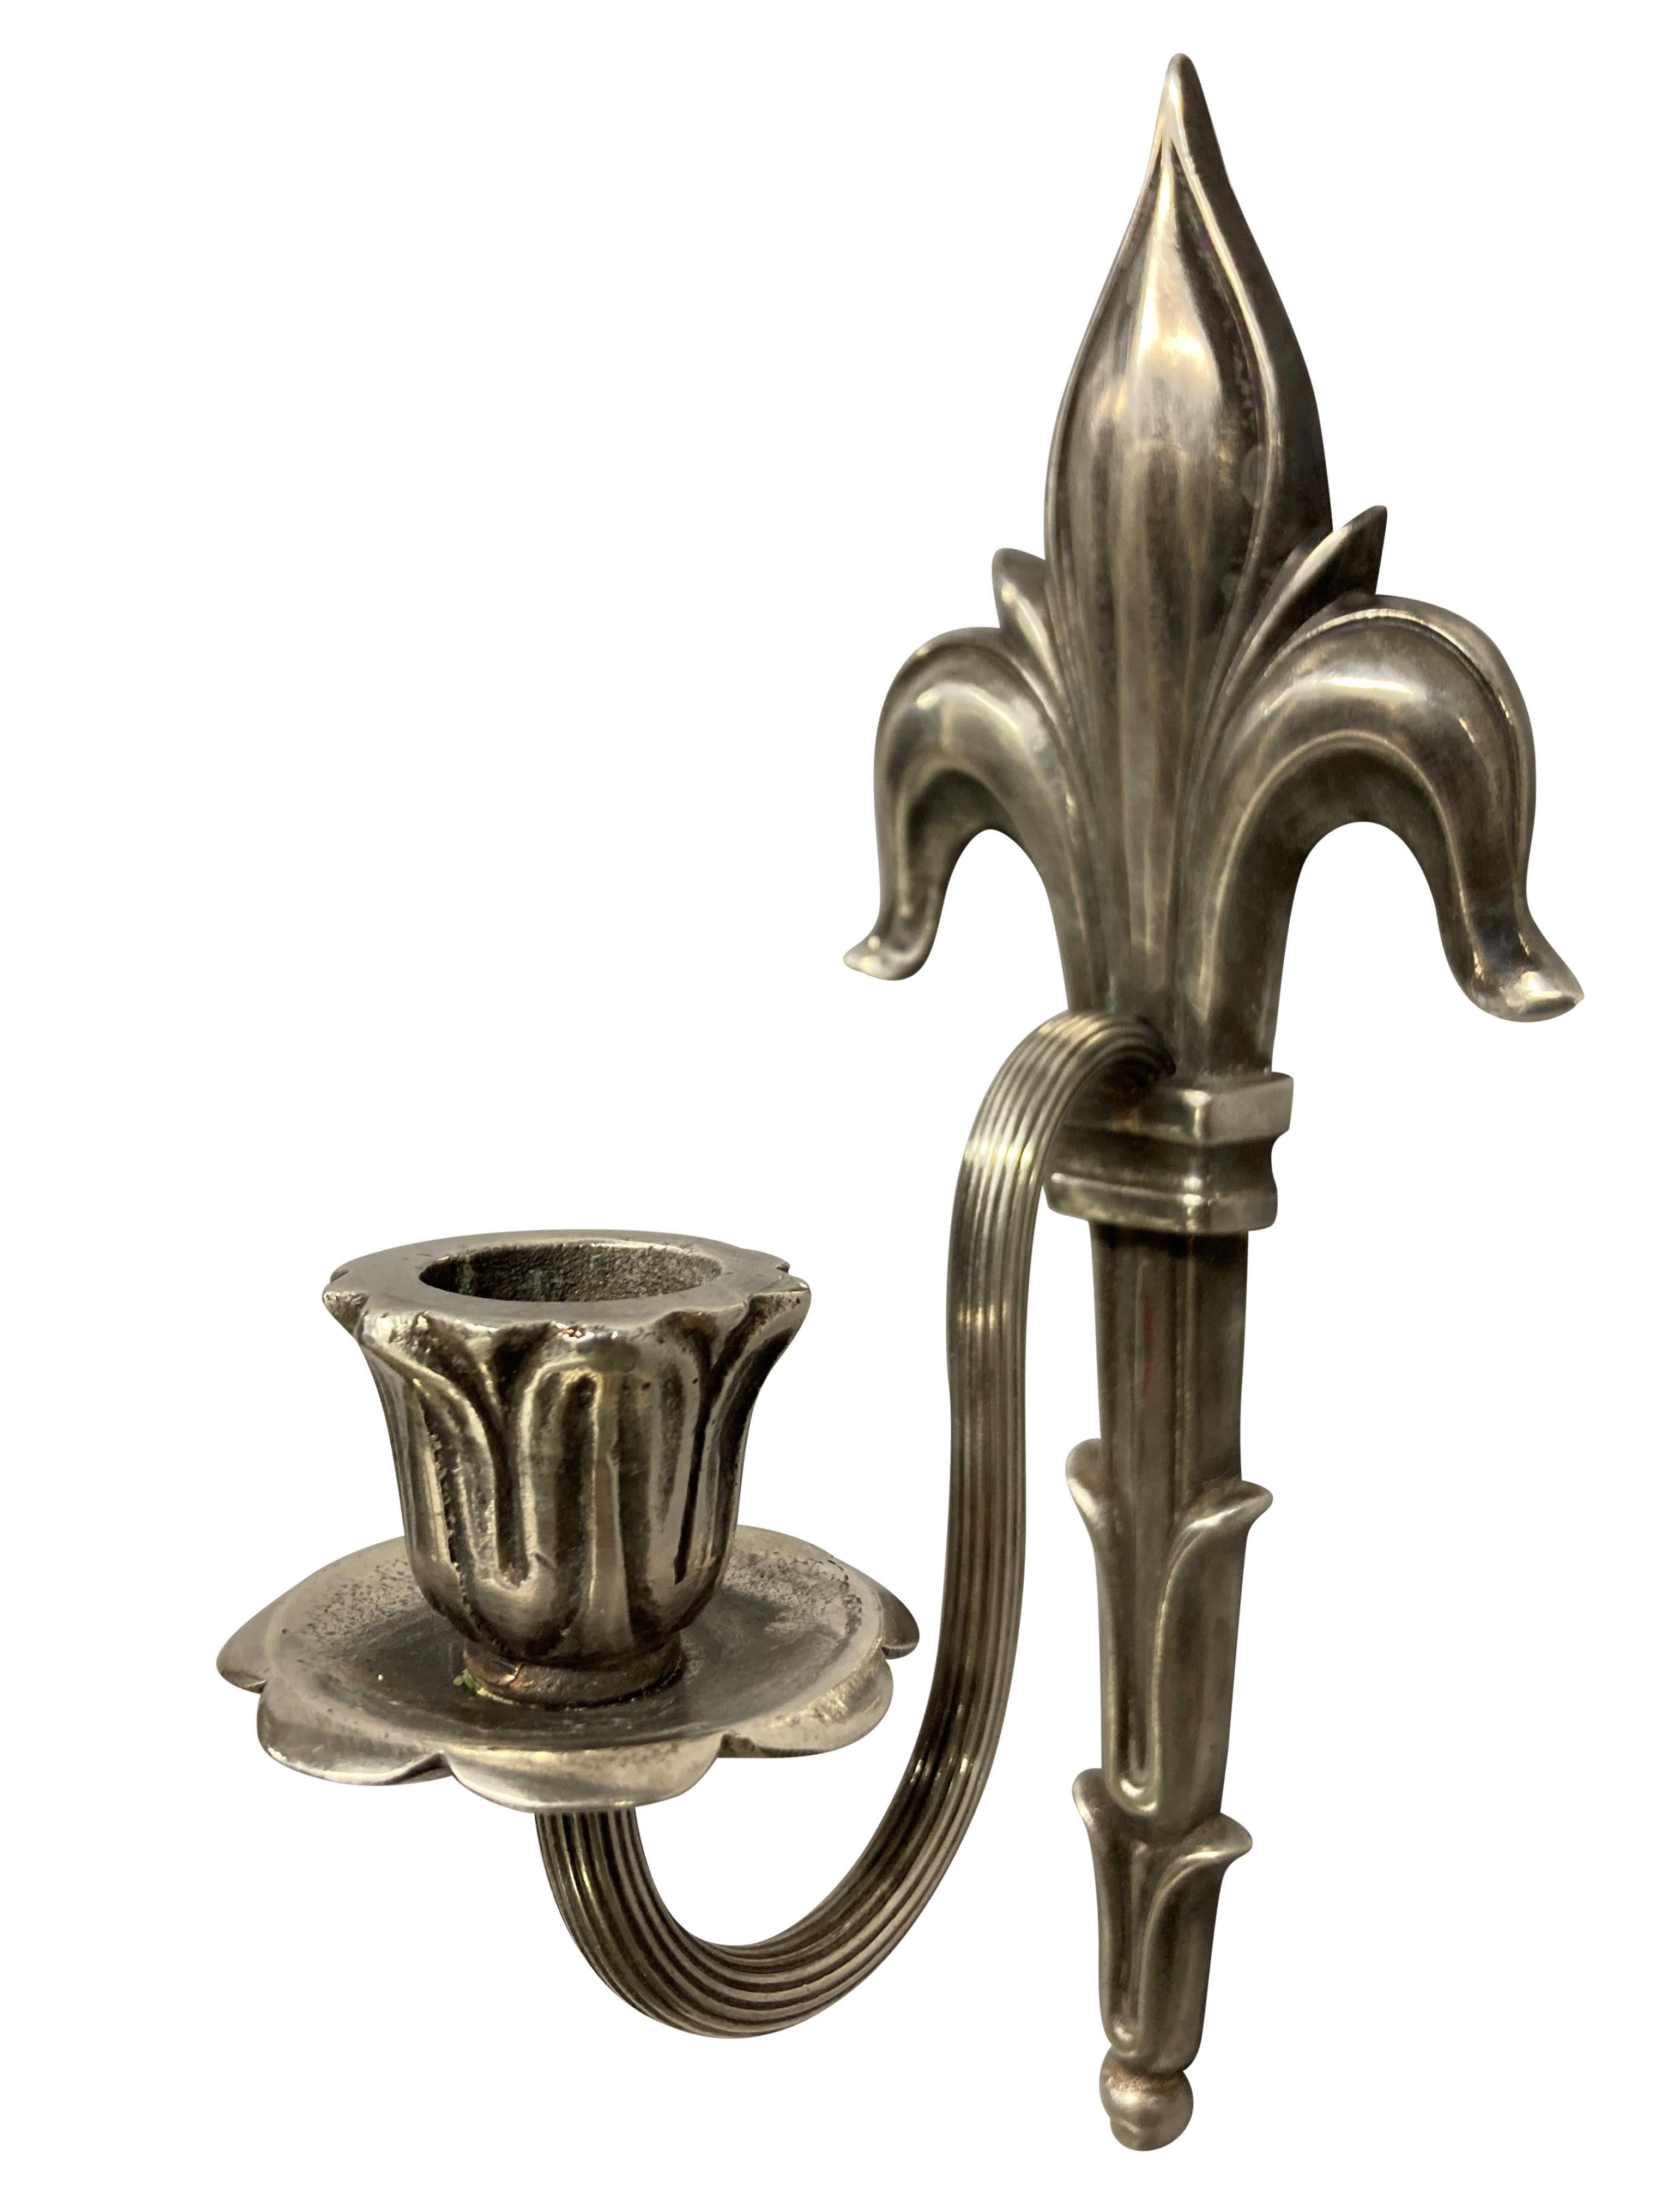 A pair of English Edwardian silver plated single arm sconces with a fleur de lys crest. These have formerly been electrified, but currently are for wax candles.